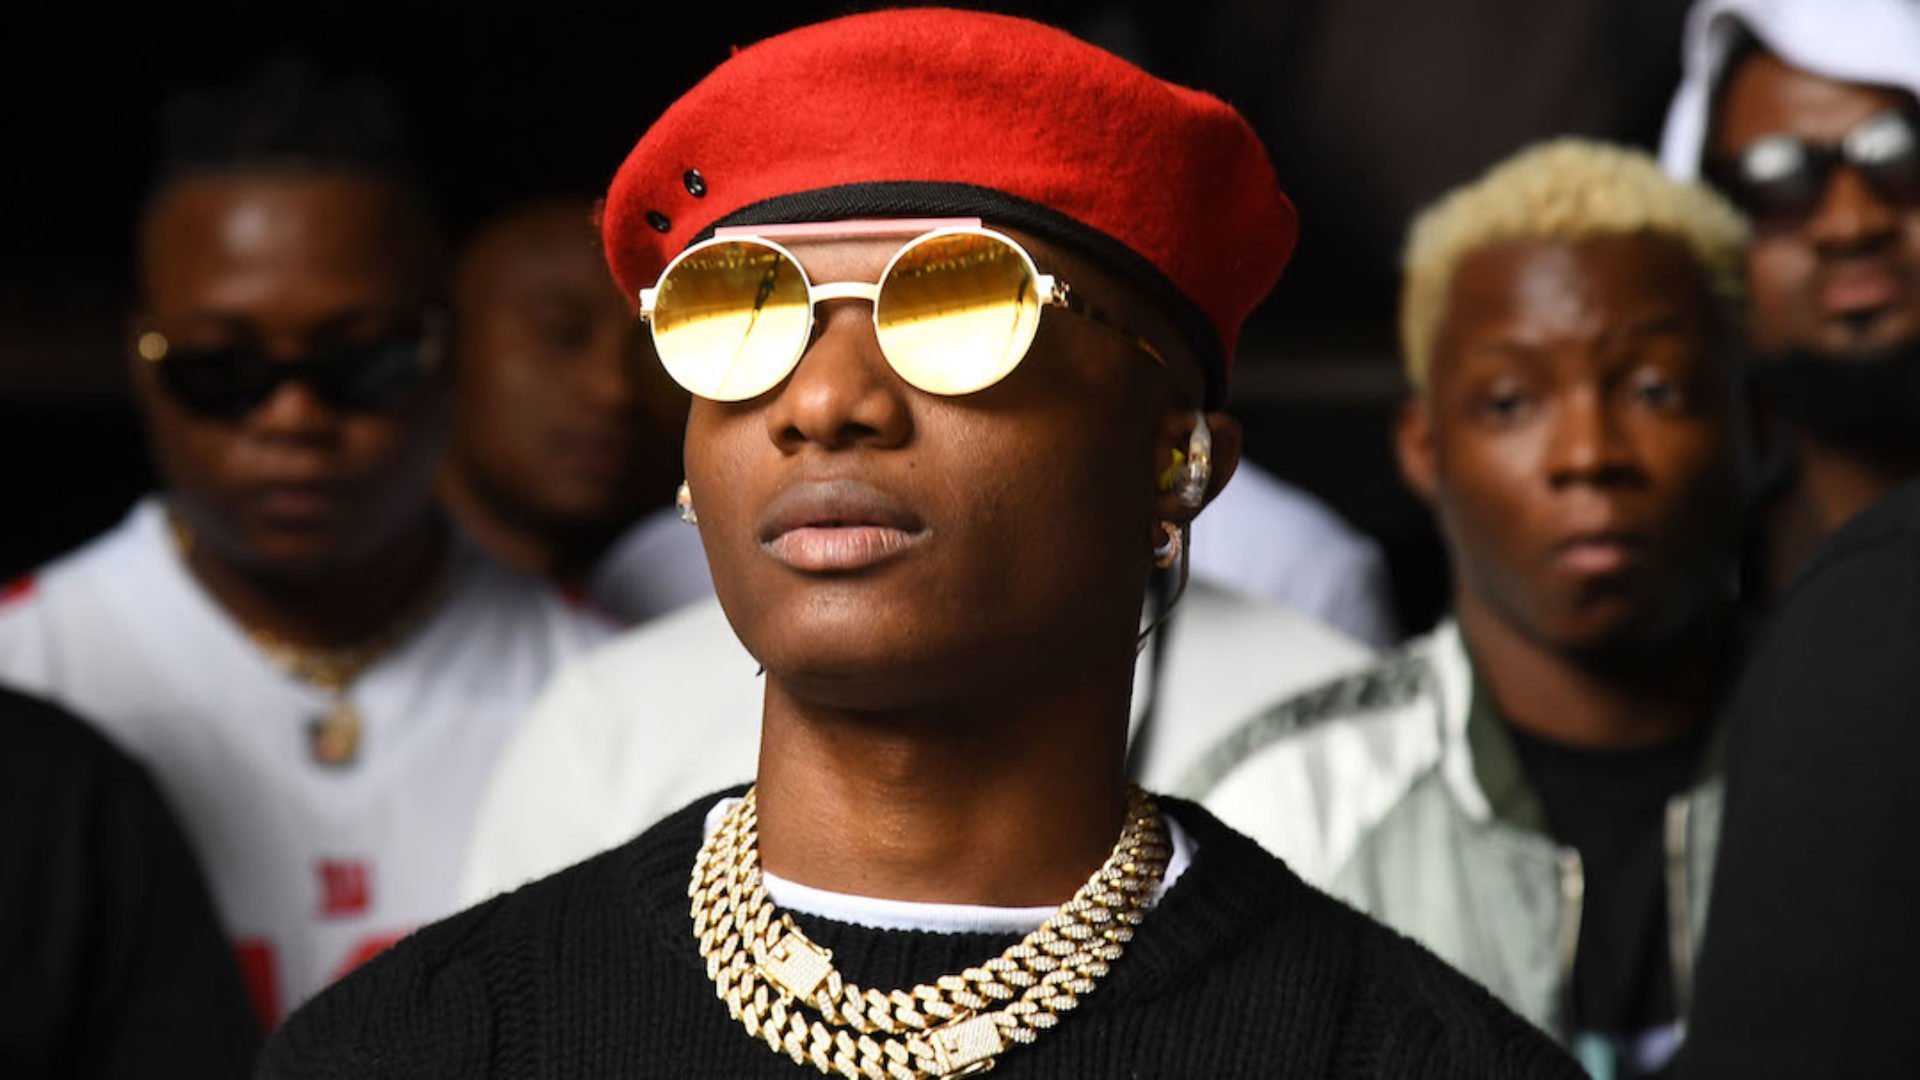 Grammys 2022: Wizkid bags two nominations for ‘Essence’, Made in Lagos (Deluxe) album